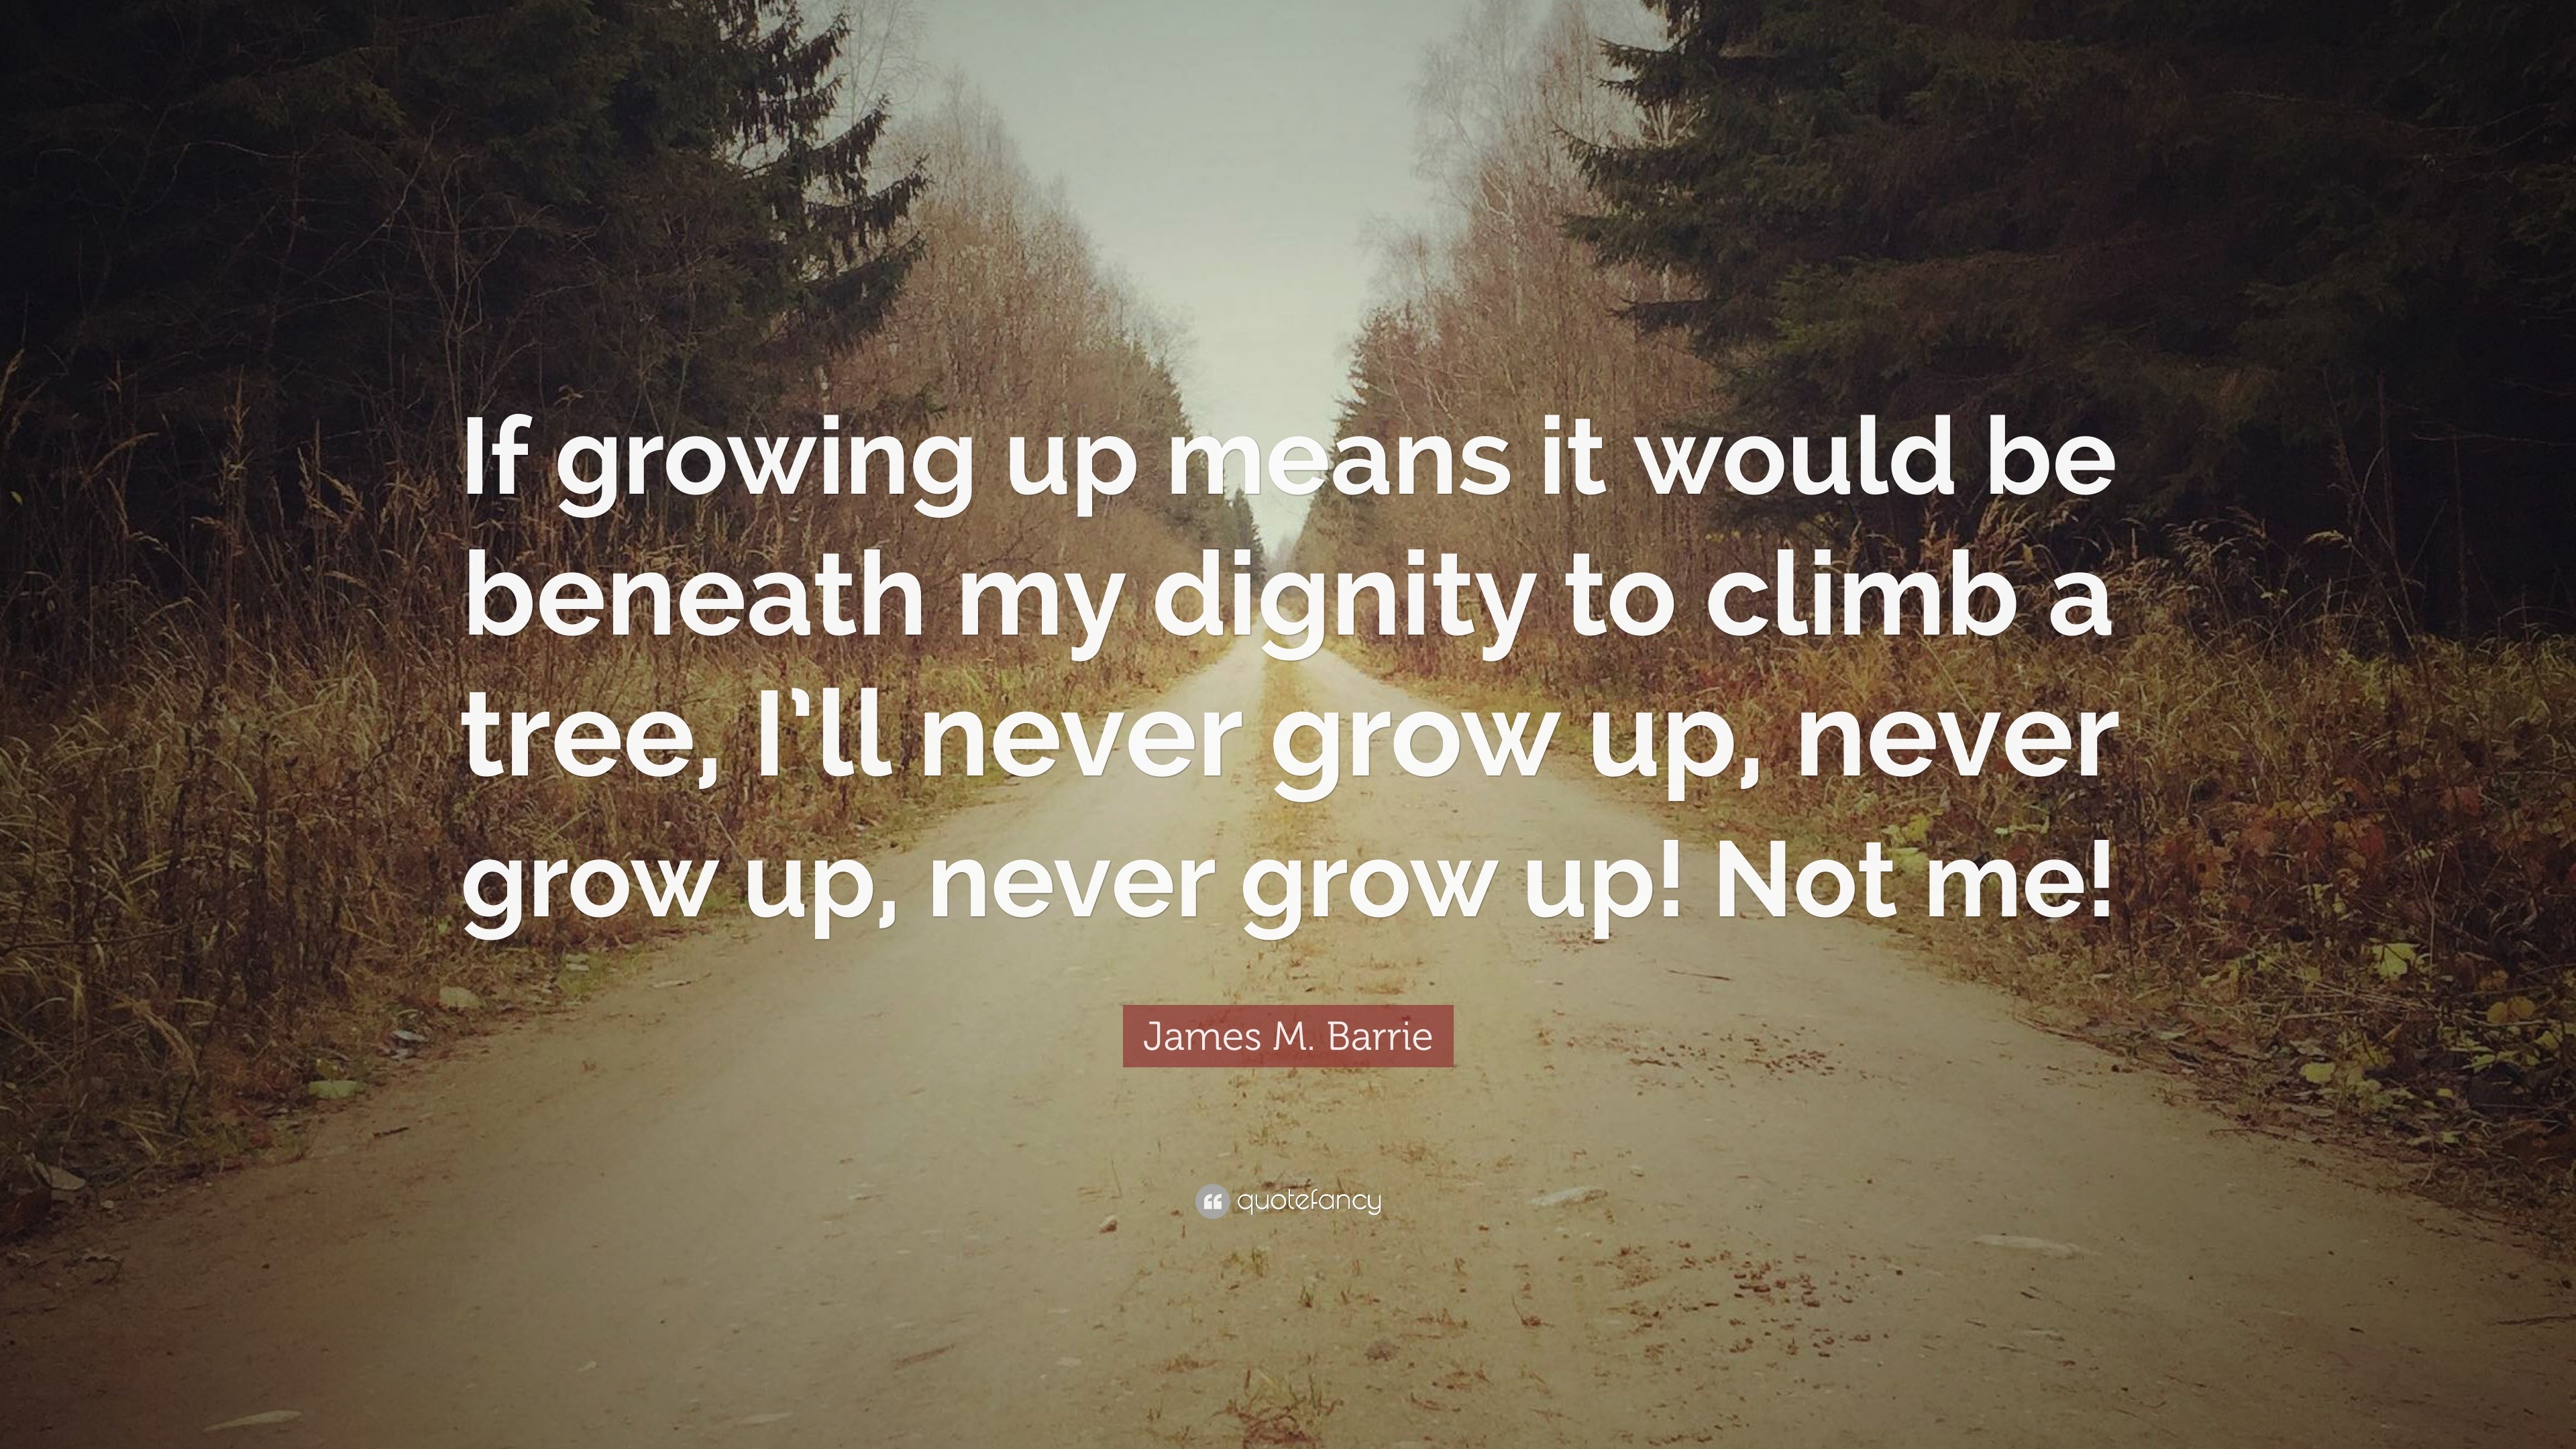 James M. Barrie Quote: “If growing up means it would be beneath my